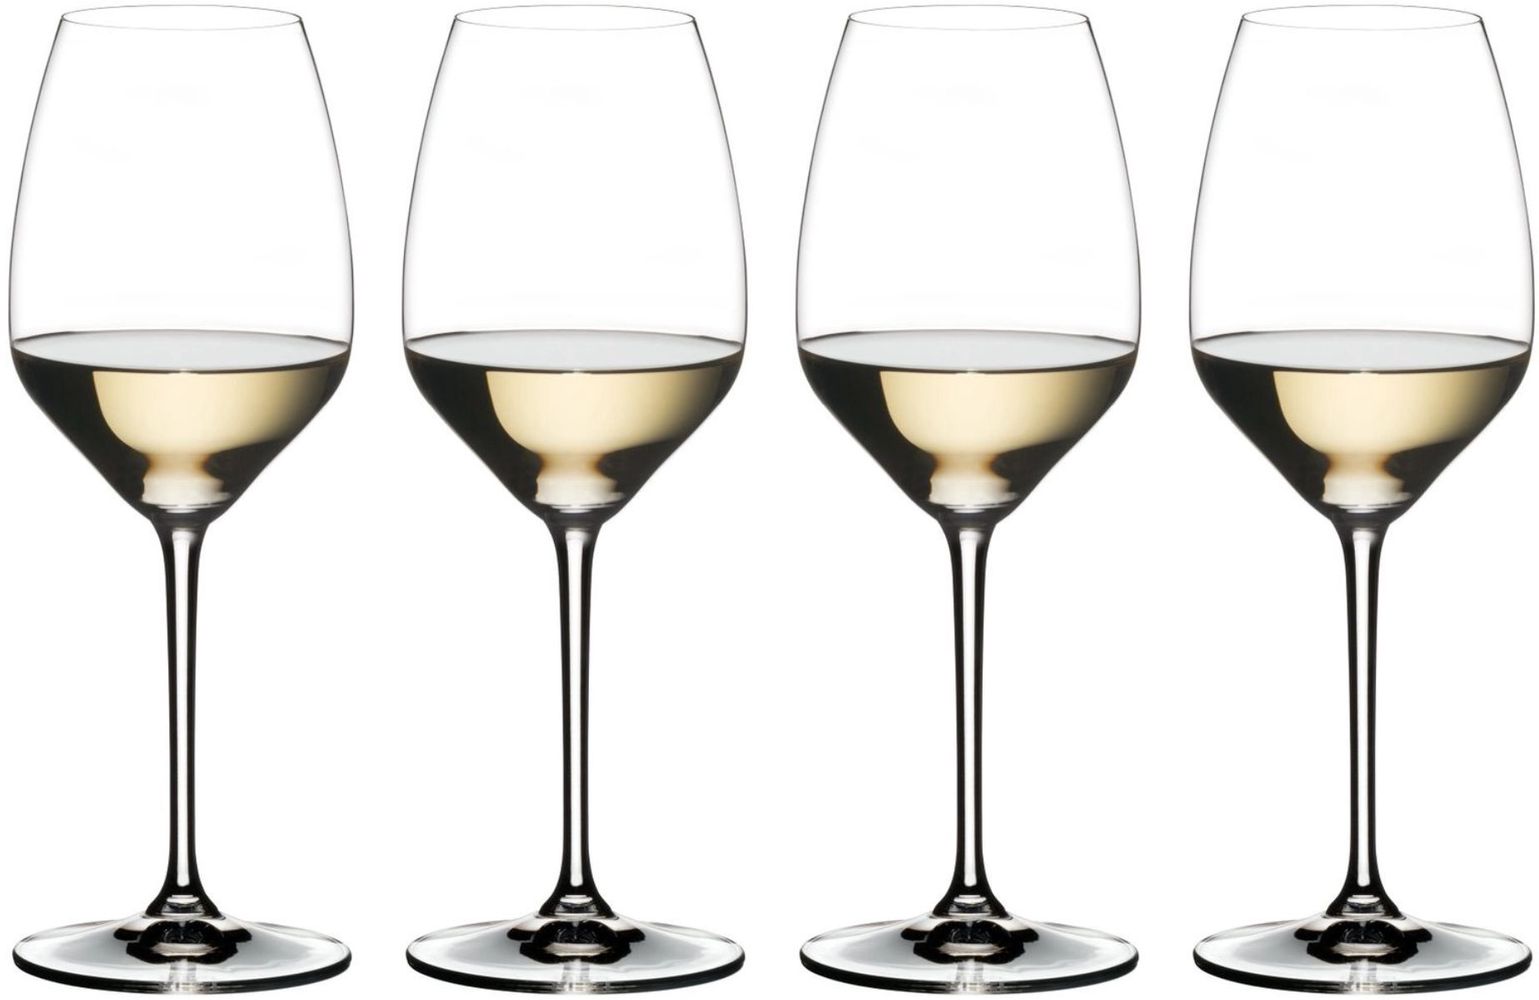 Riedel Heart To Heart Riesling Wine Glasses, Set of 4